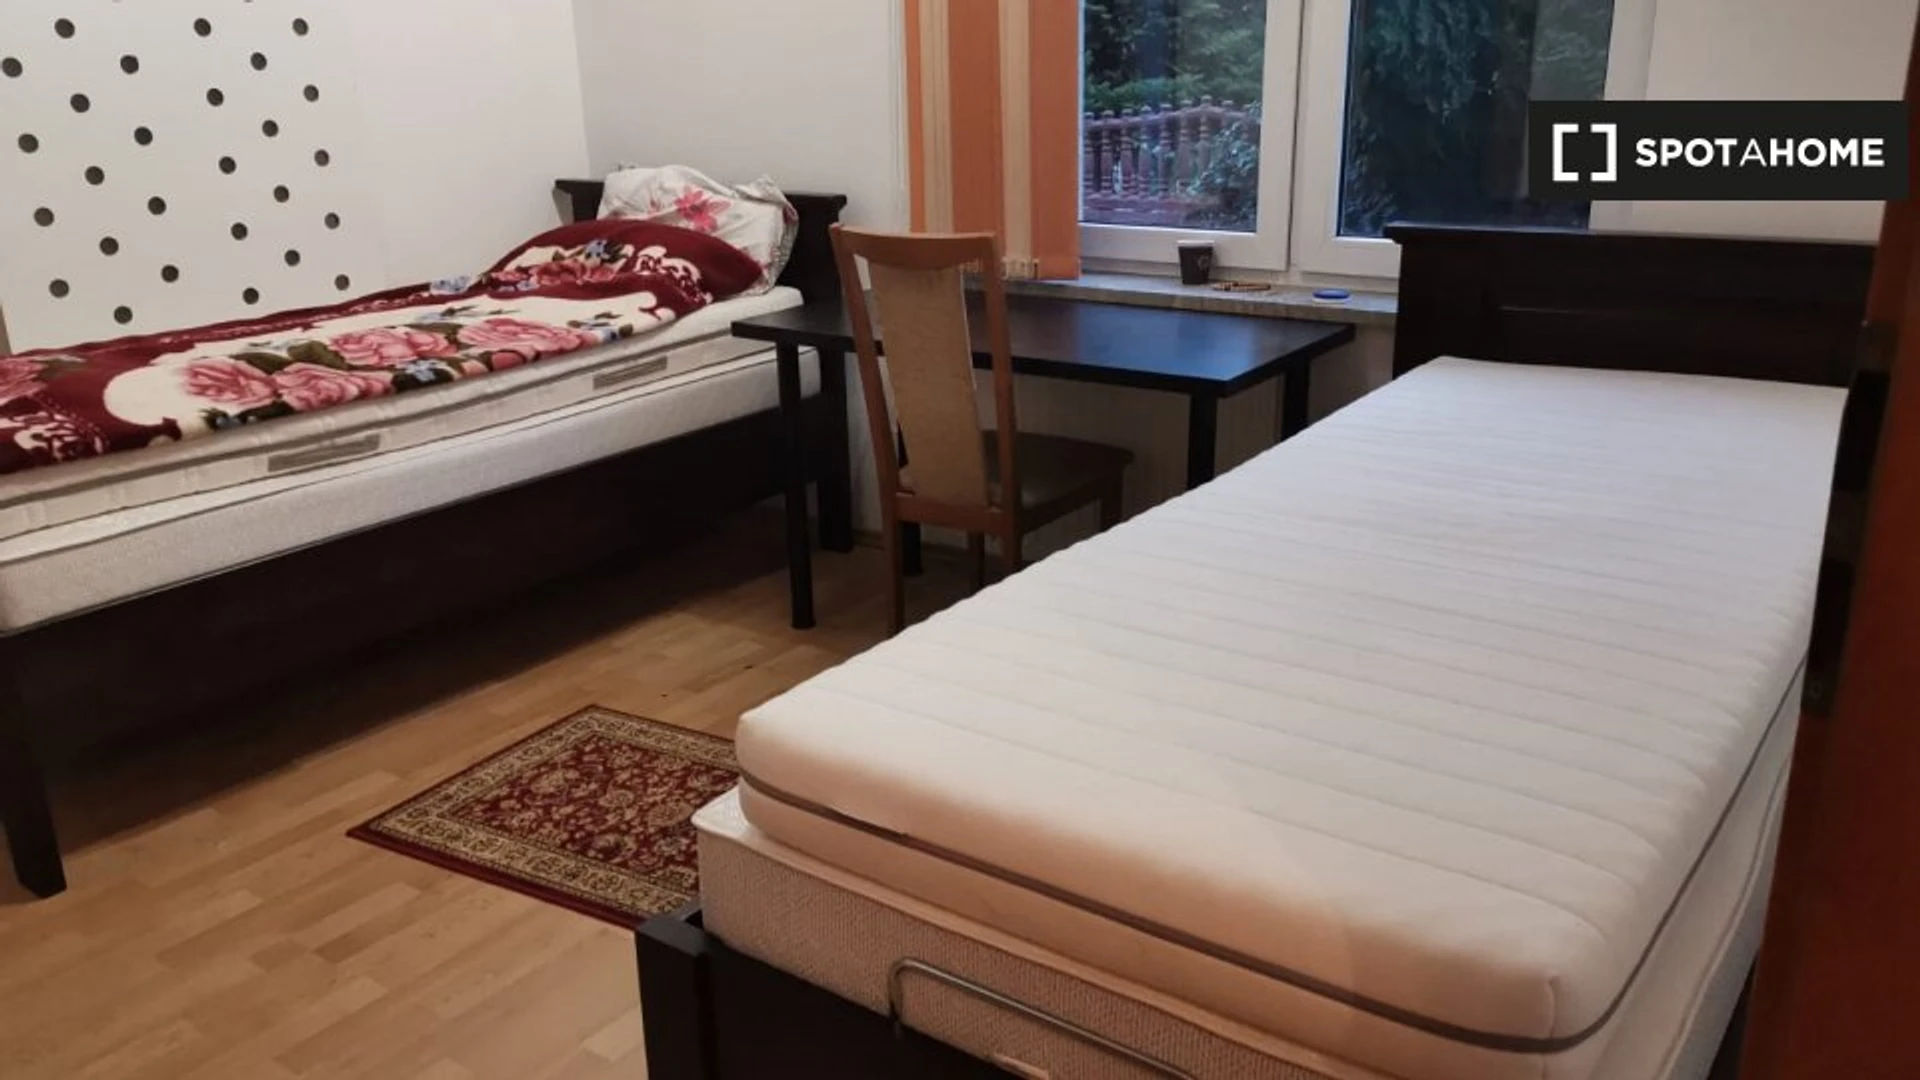 Room for rent with double bed Poznań